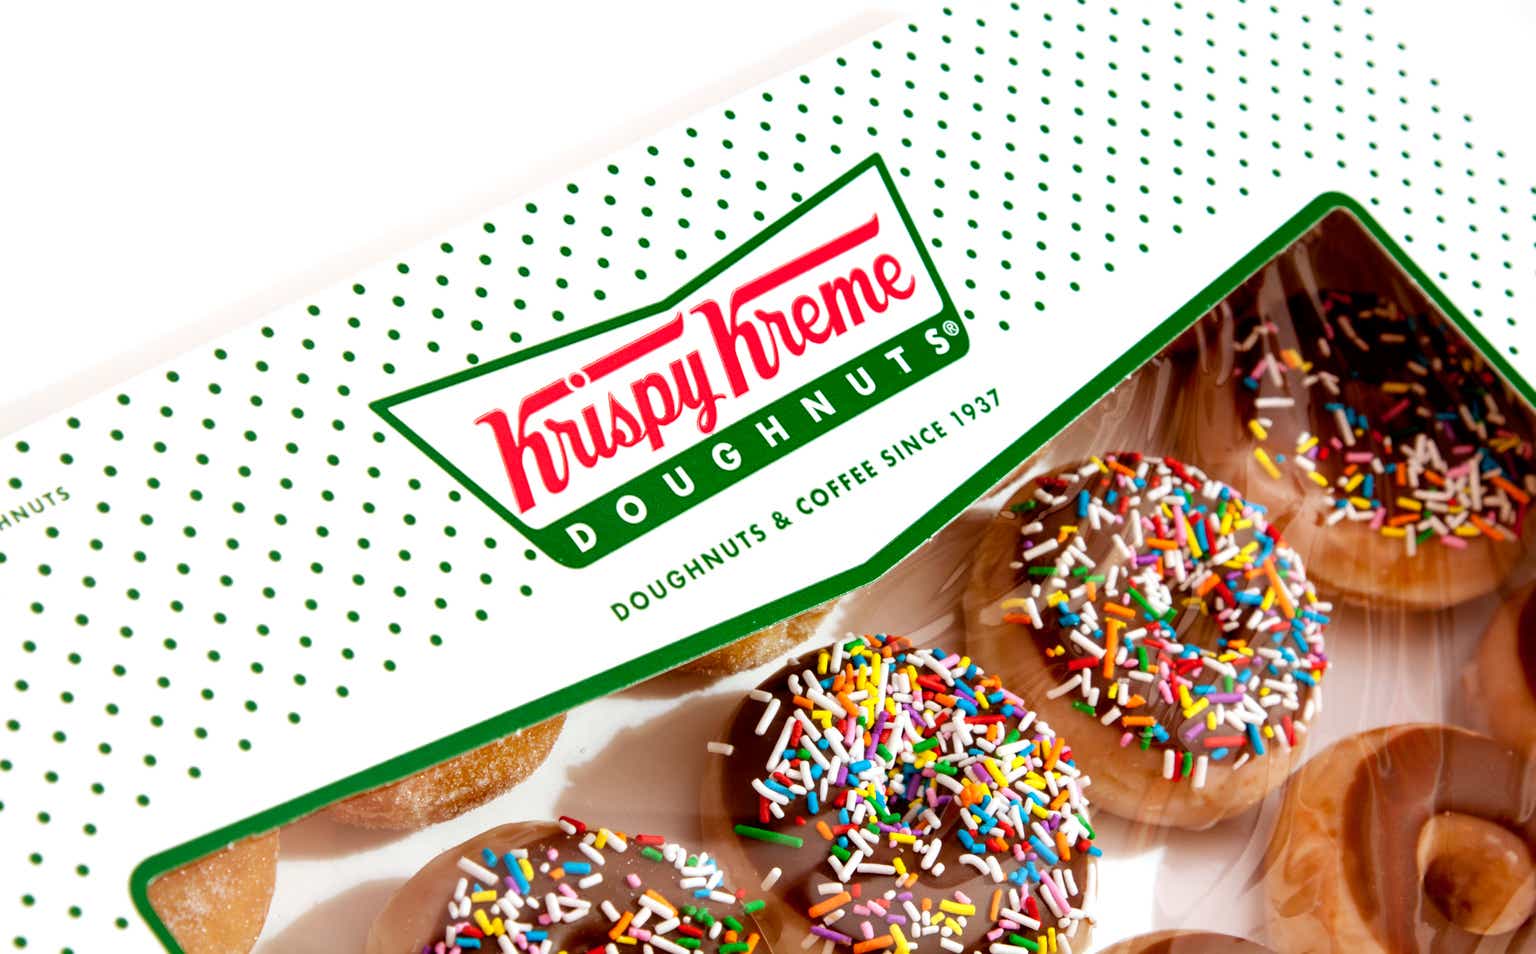 Krispy Kreme: Does The Partnership With McDonald's Justify The Price?